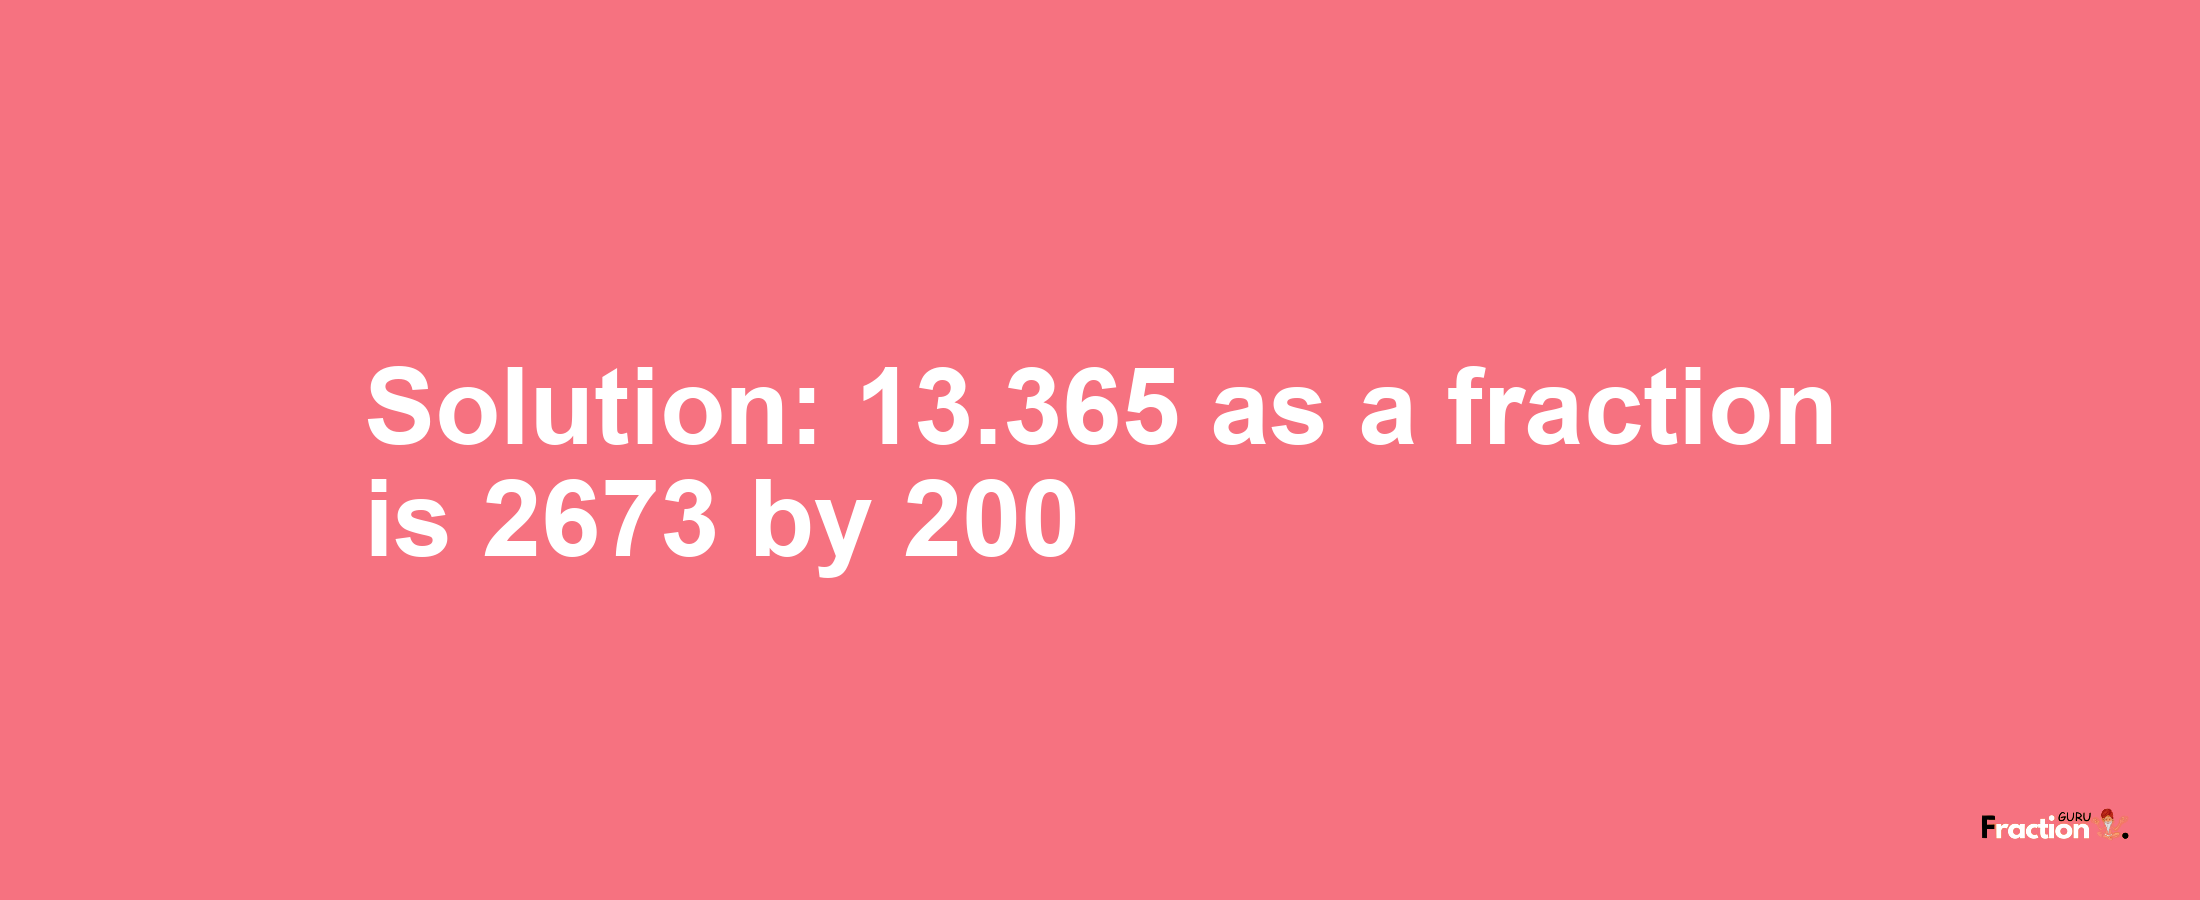 Solution:13.365 as a fraction is 2673/200